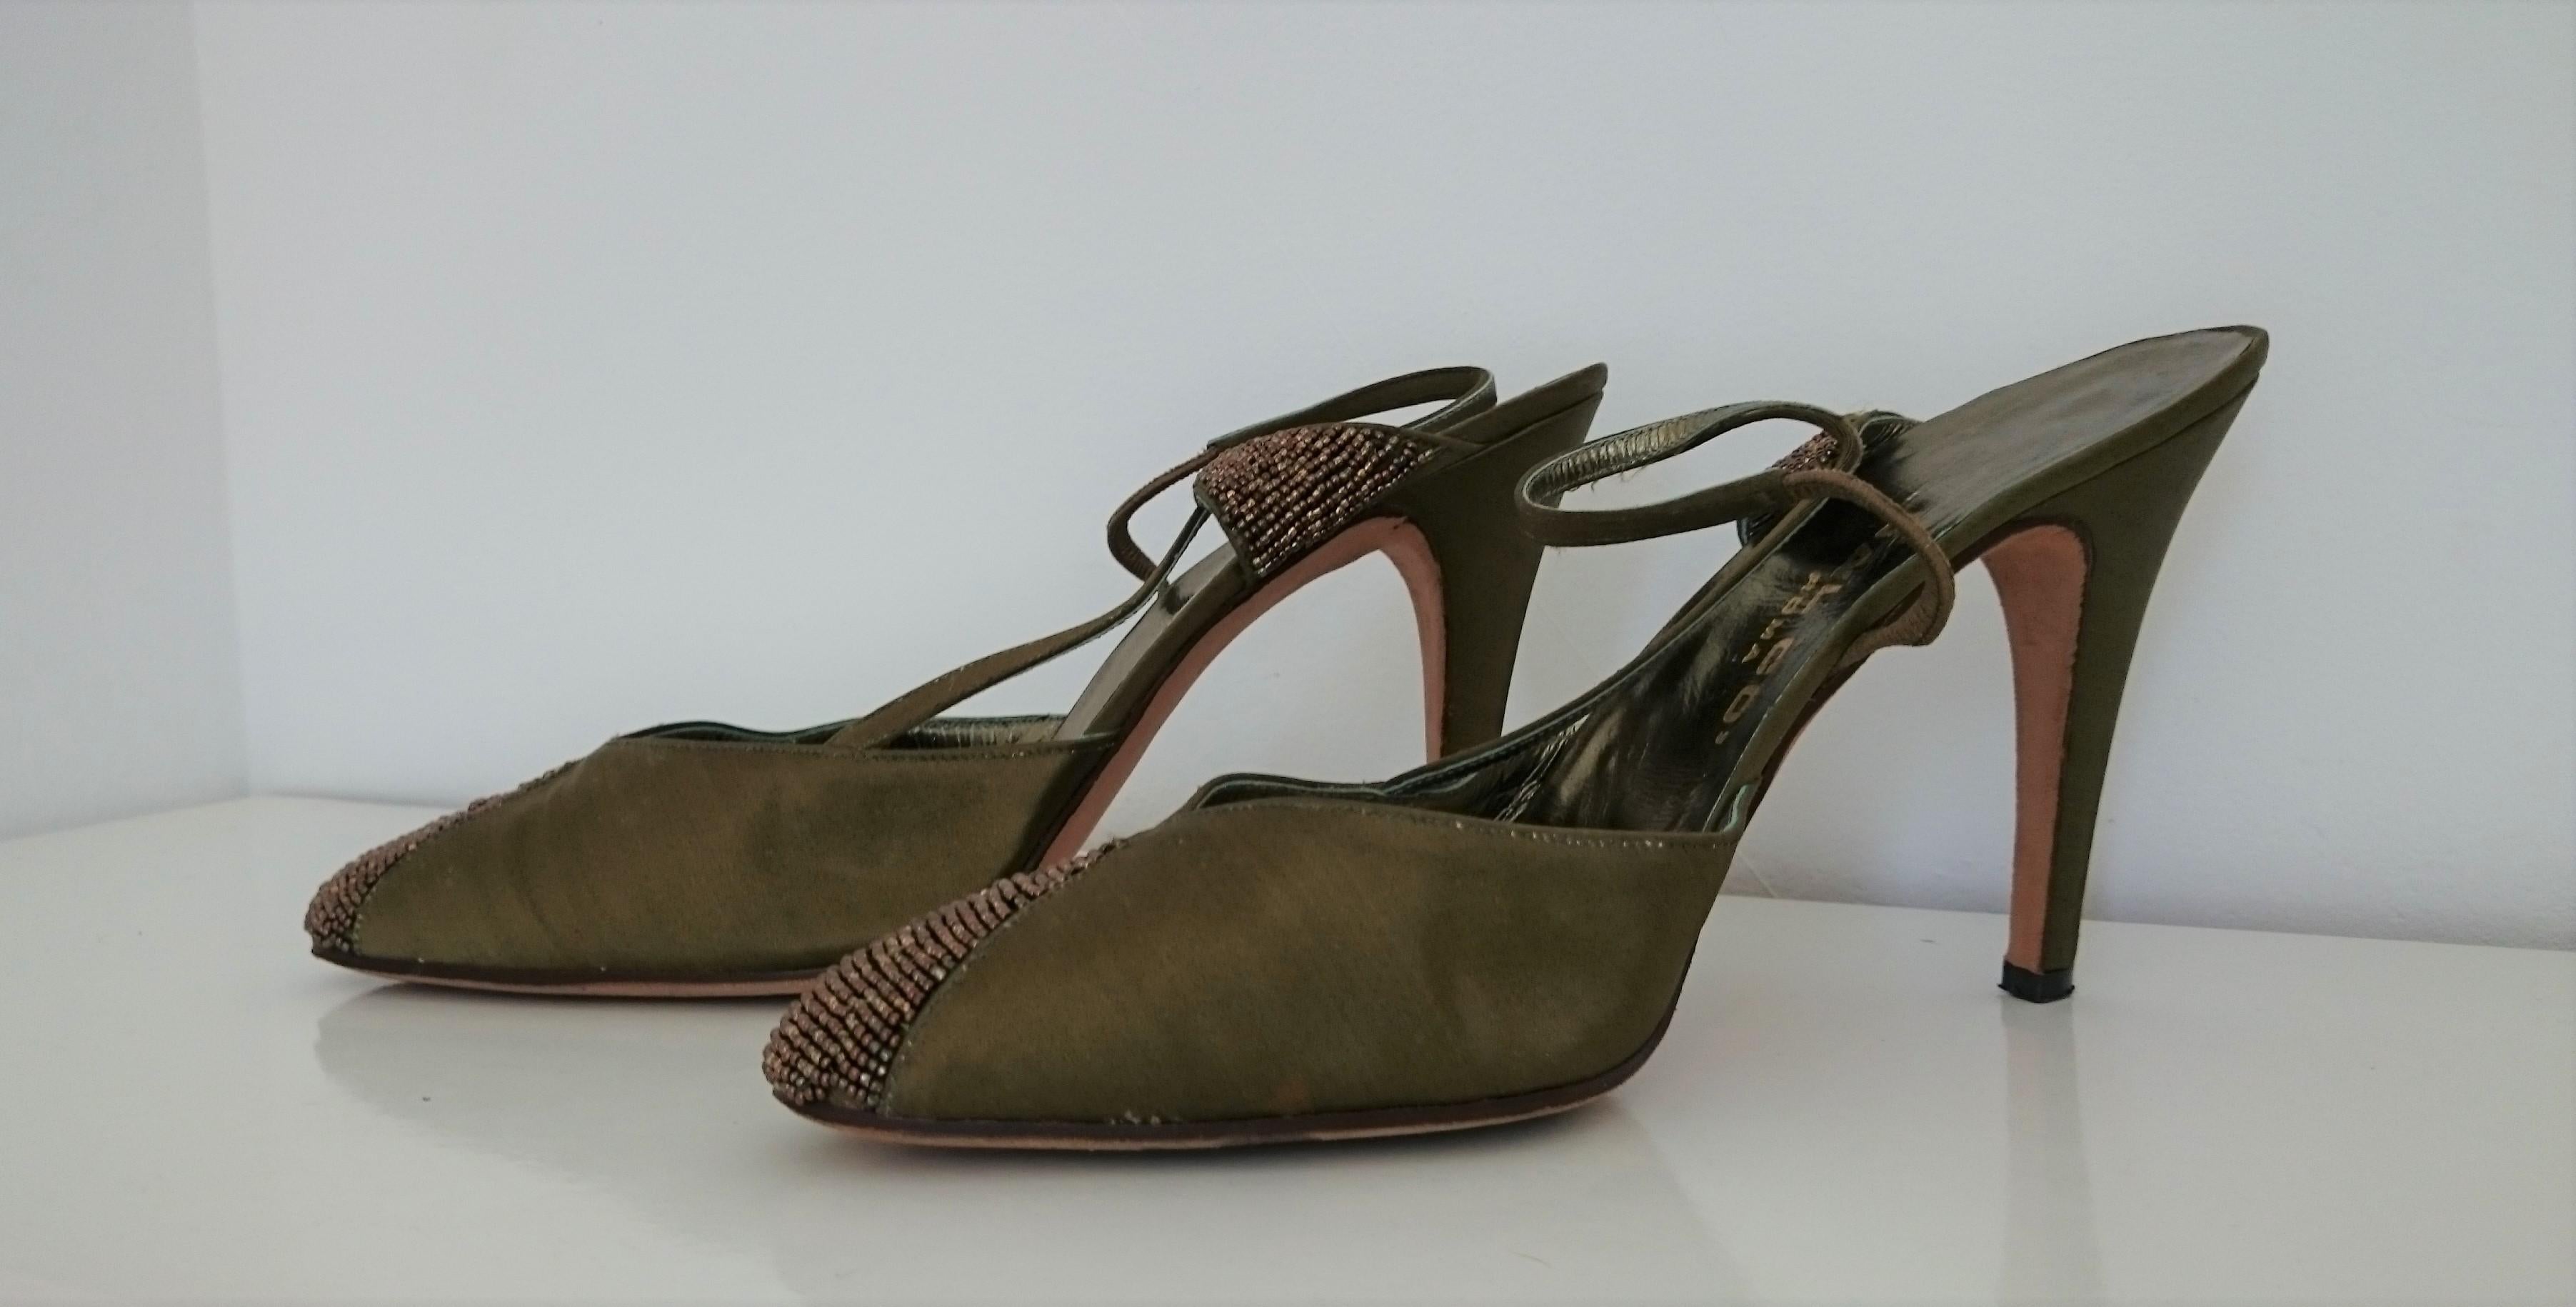 Valentino's Design Heels made by Dal Co' in Rome, Italy
They have a Green/Light-Brown color.
Made principally of Silk, Leather and with some green Brillants in the front.
Heel height:  10.2 cm
Conditions: Excellent
Size 8 (US)
Made in Italy